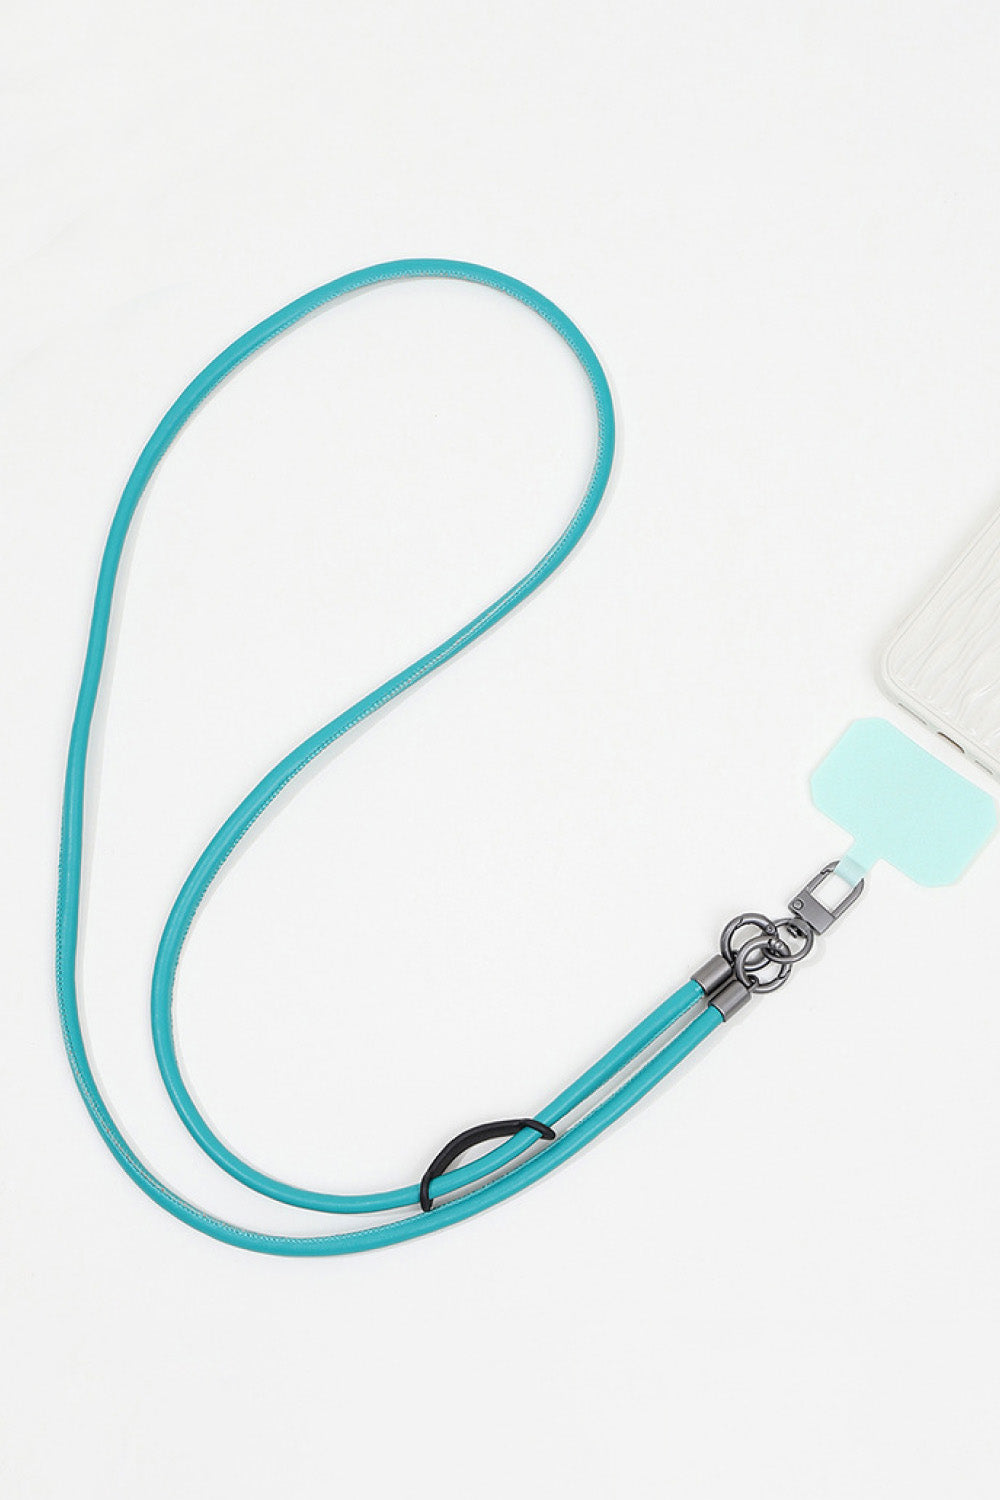 Trendsi Cupid Beauty Supplies Turquoise / One Size Keychains PU Phone Lanyard